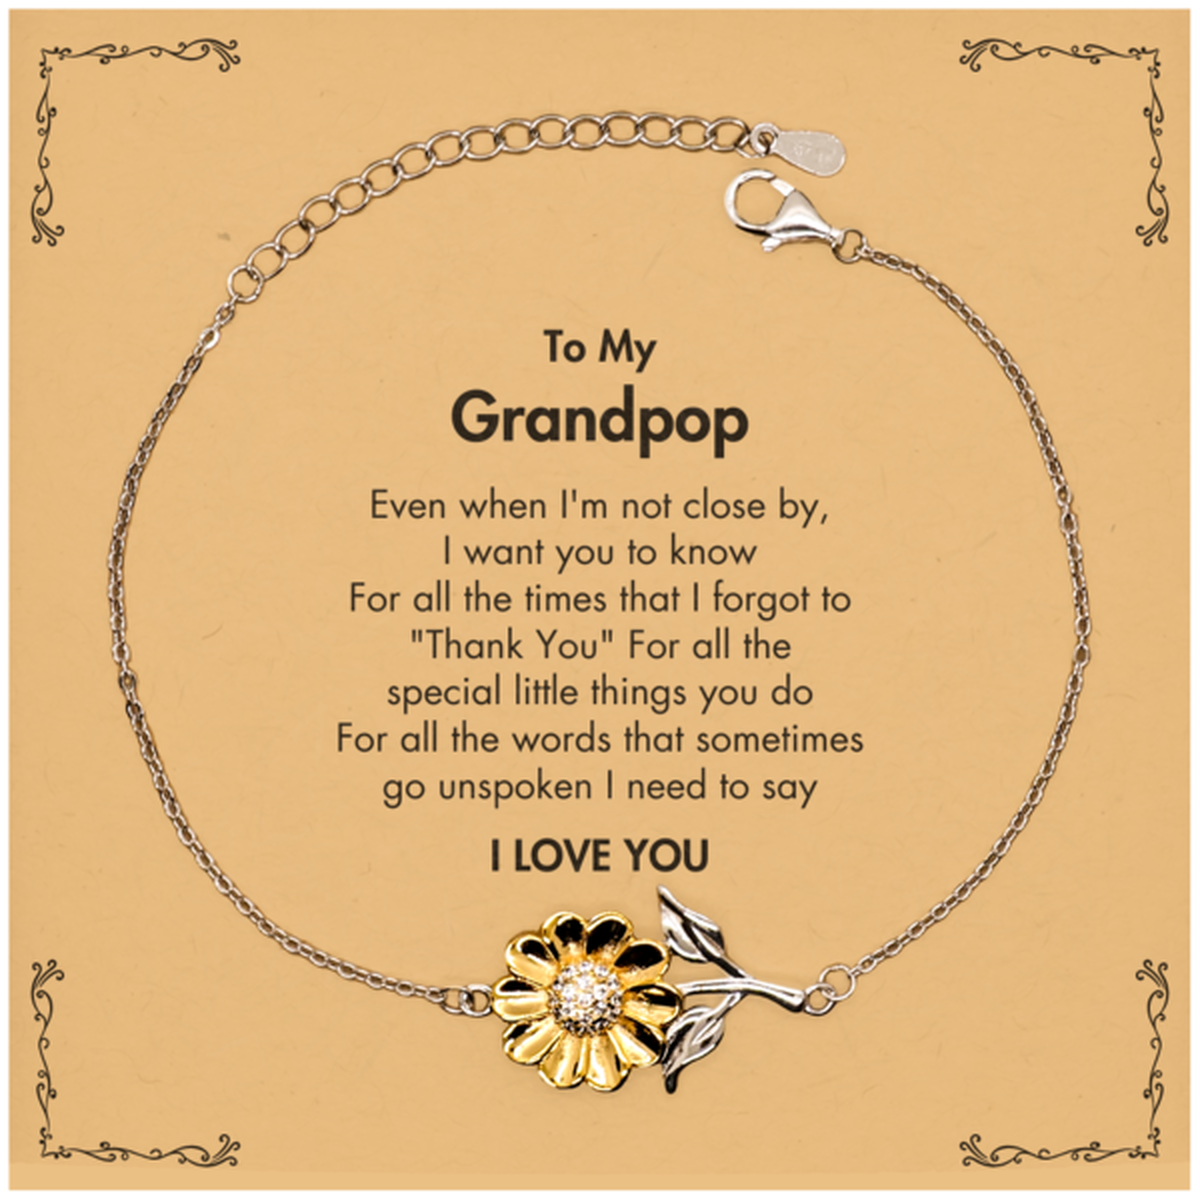 Thank You Gifts for Grandpop, Keepsake Sunflower Bracelet Gifts for Grandpop Birthday Mother's day Father's Day Grandpop For all the words That sometimes go unspoken I need to say I LOVE YOU